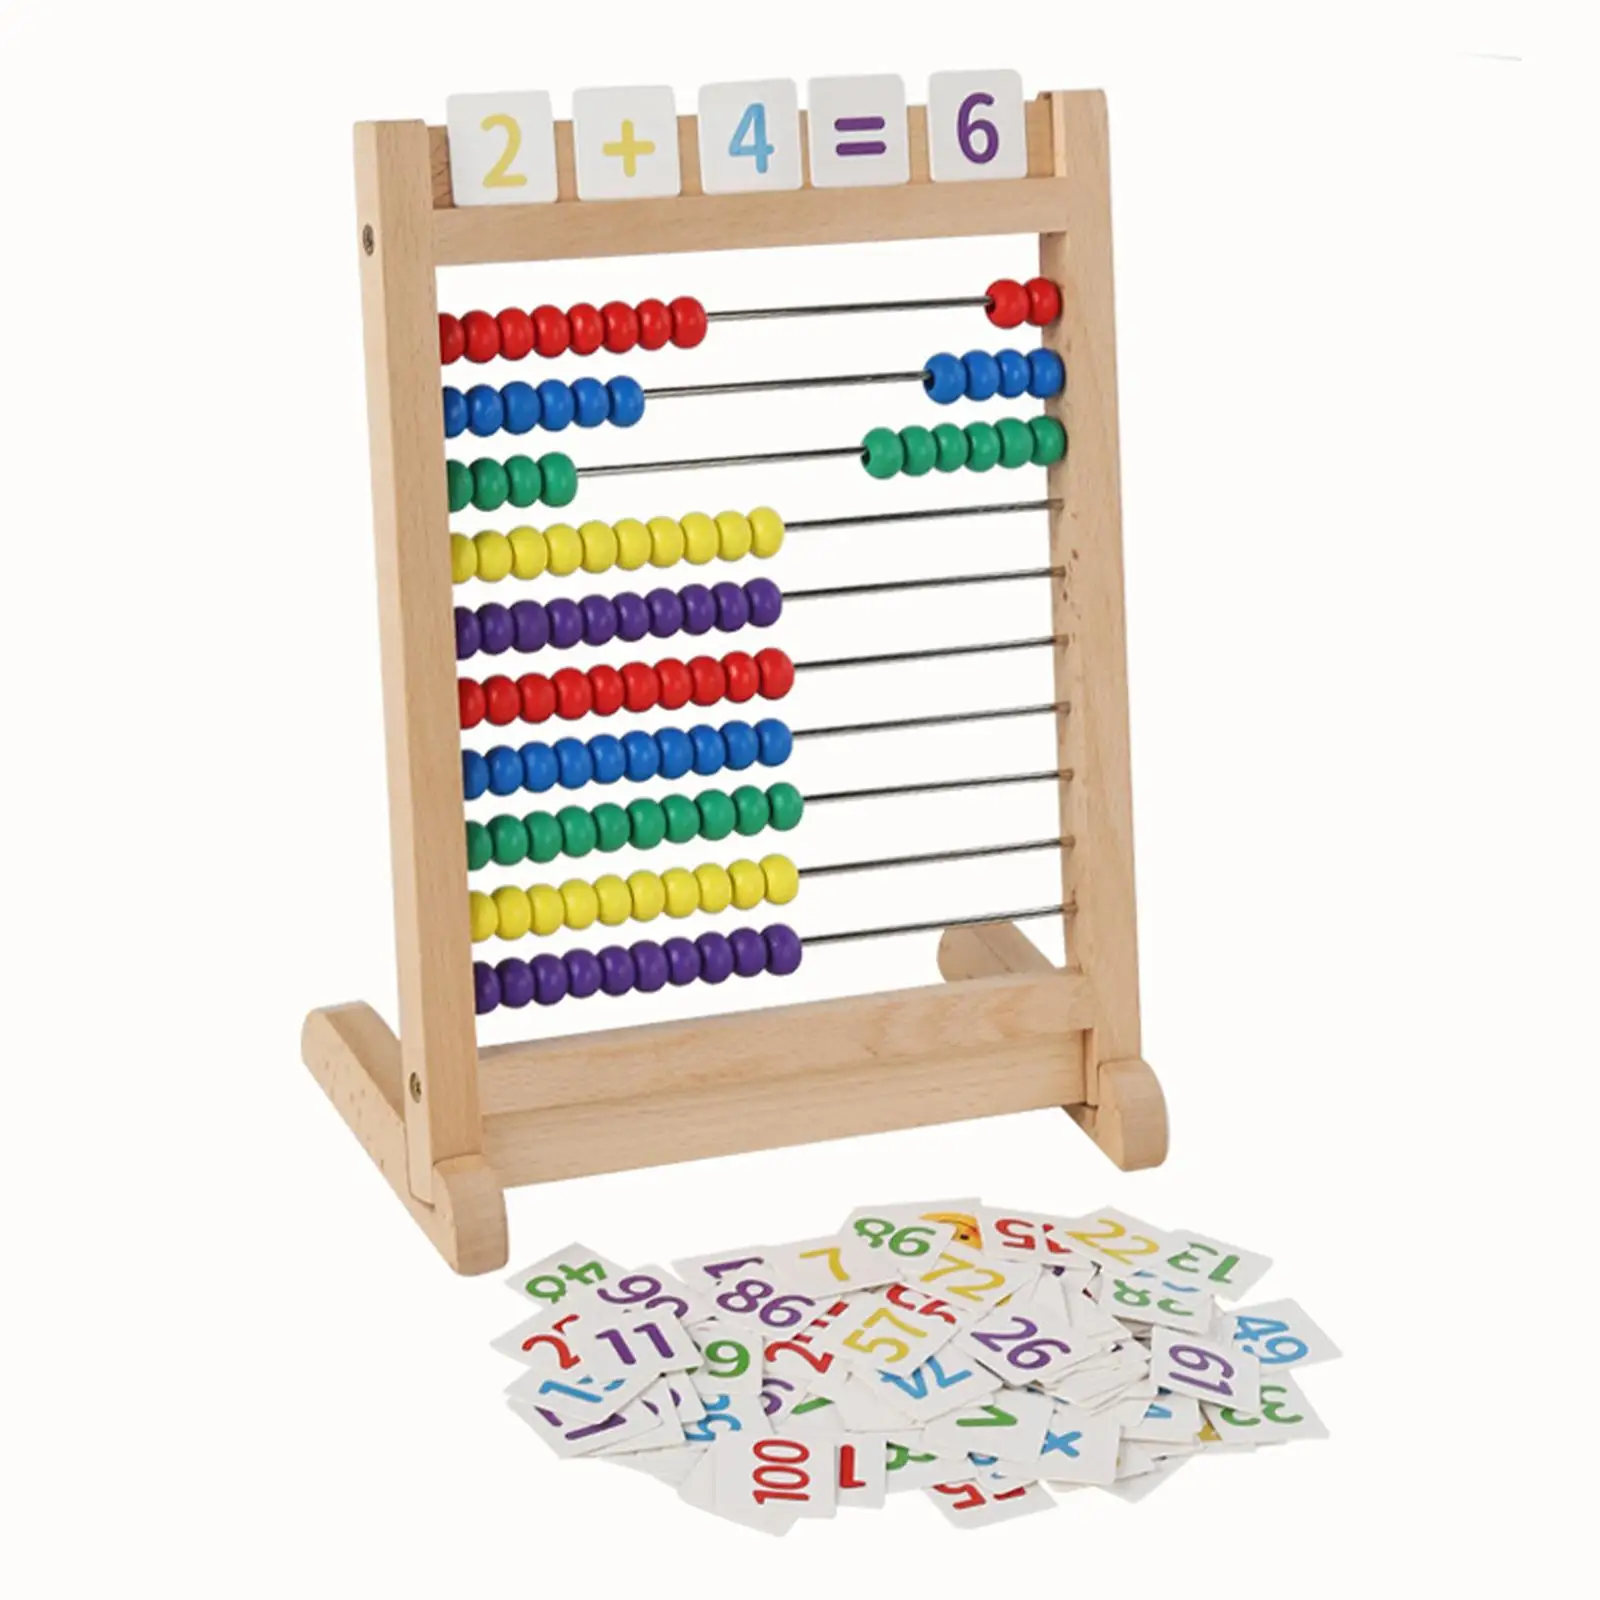 Colorful Wooden Abacus Bead Arithmetic Abacus Ten Frame Set Educational Counting Frames Toy for Kindergarten Kids Elementary